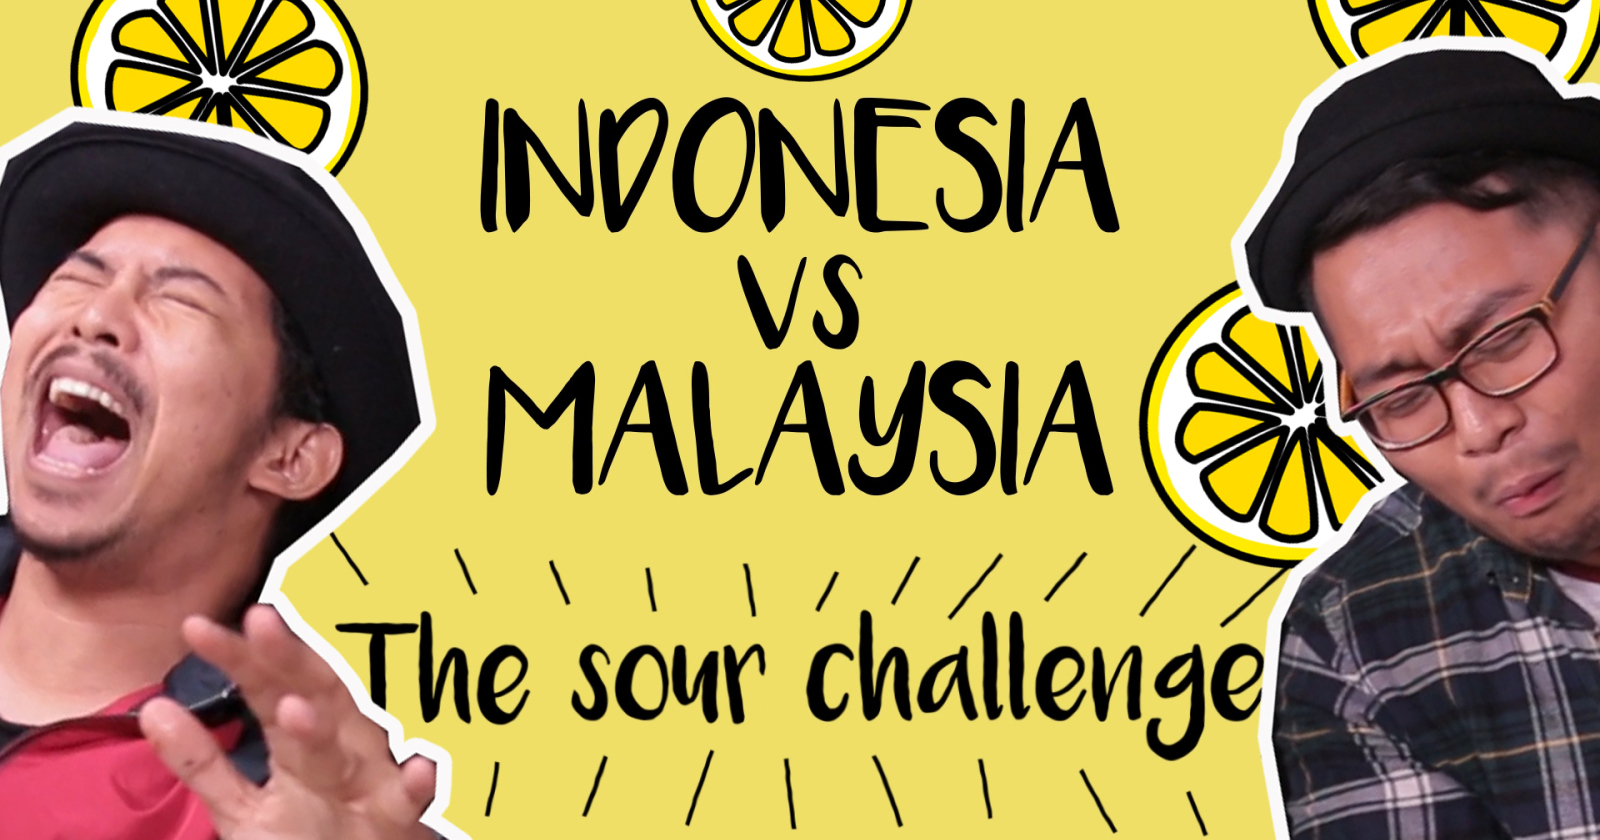 [video] Indonesia Vs Malaysia The Sour Challenge